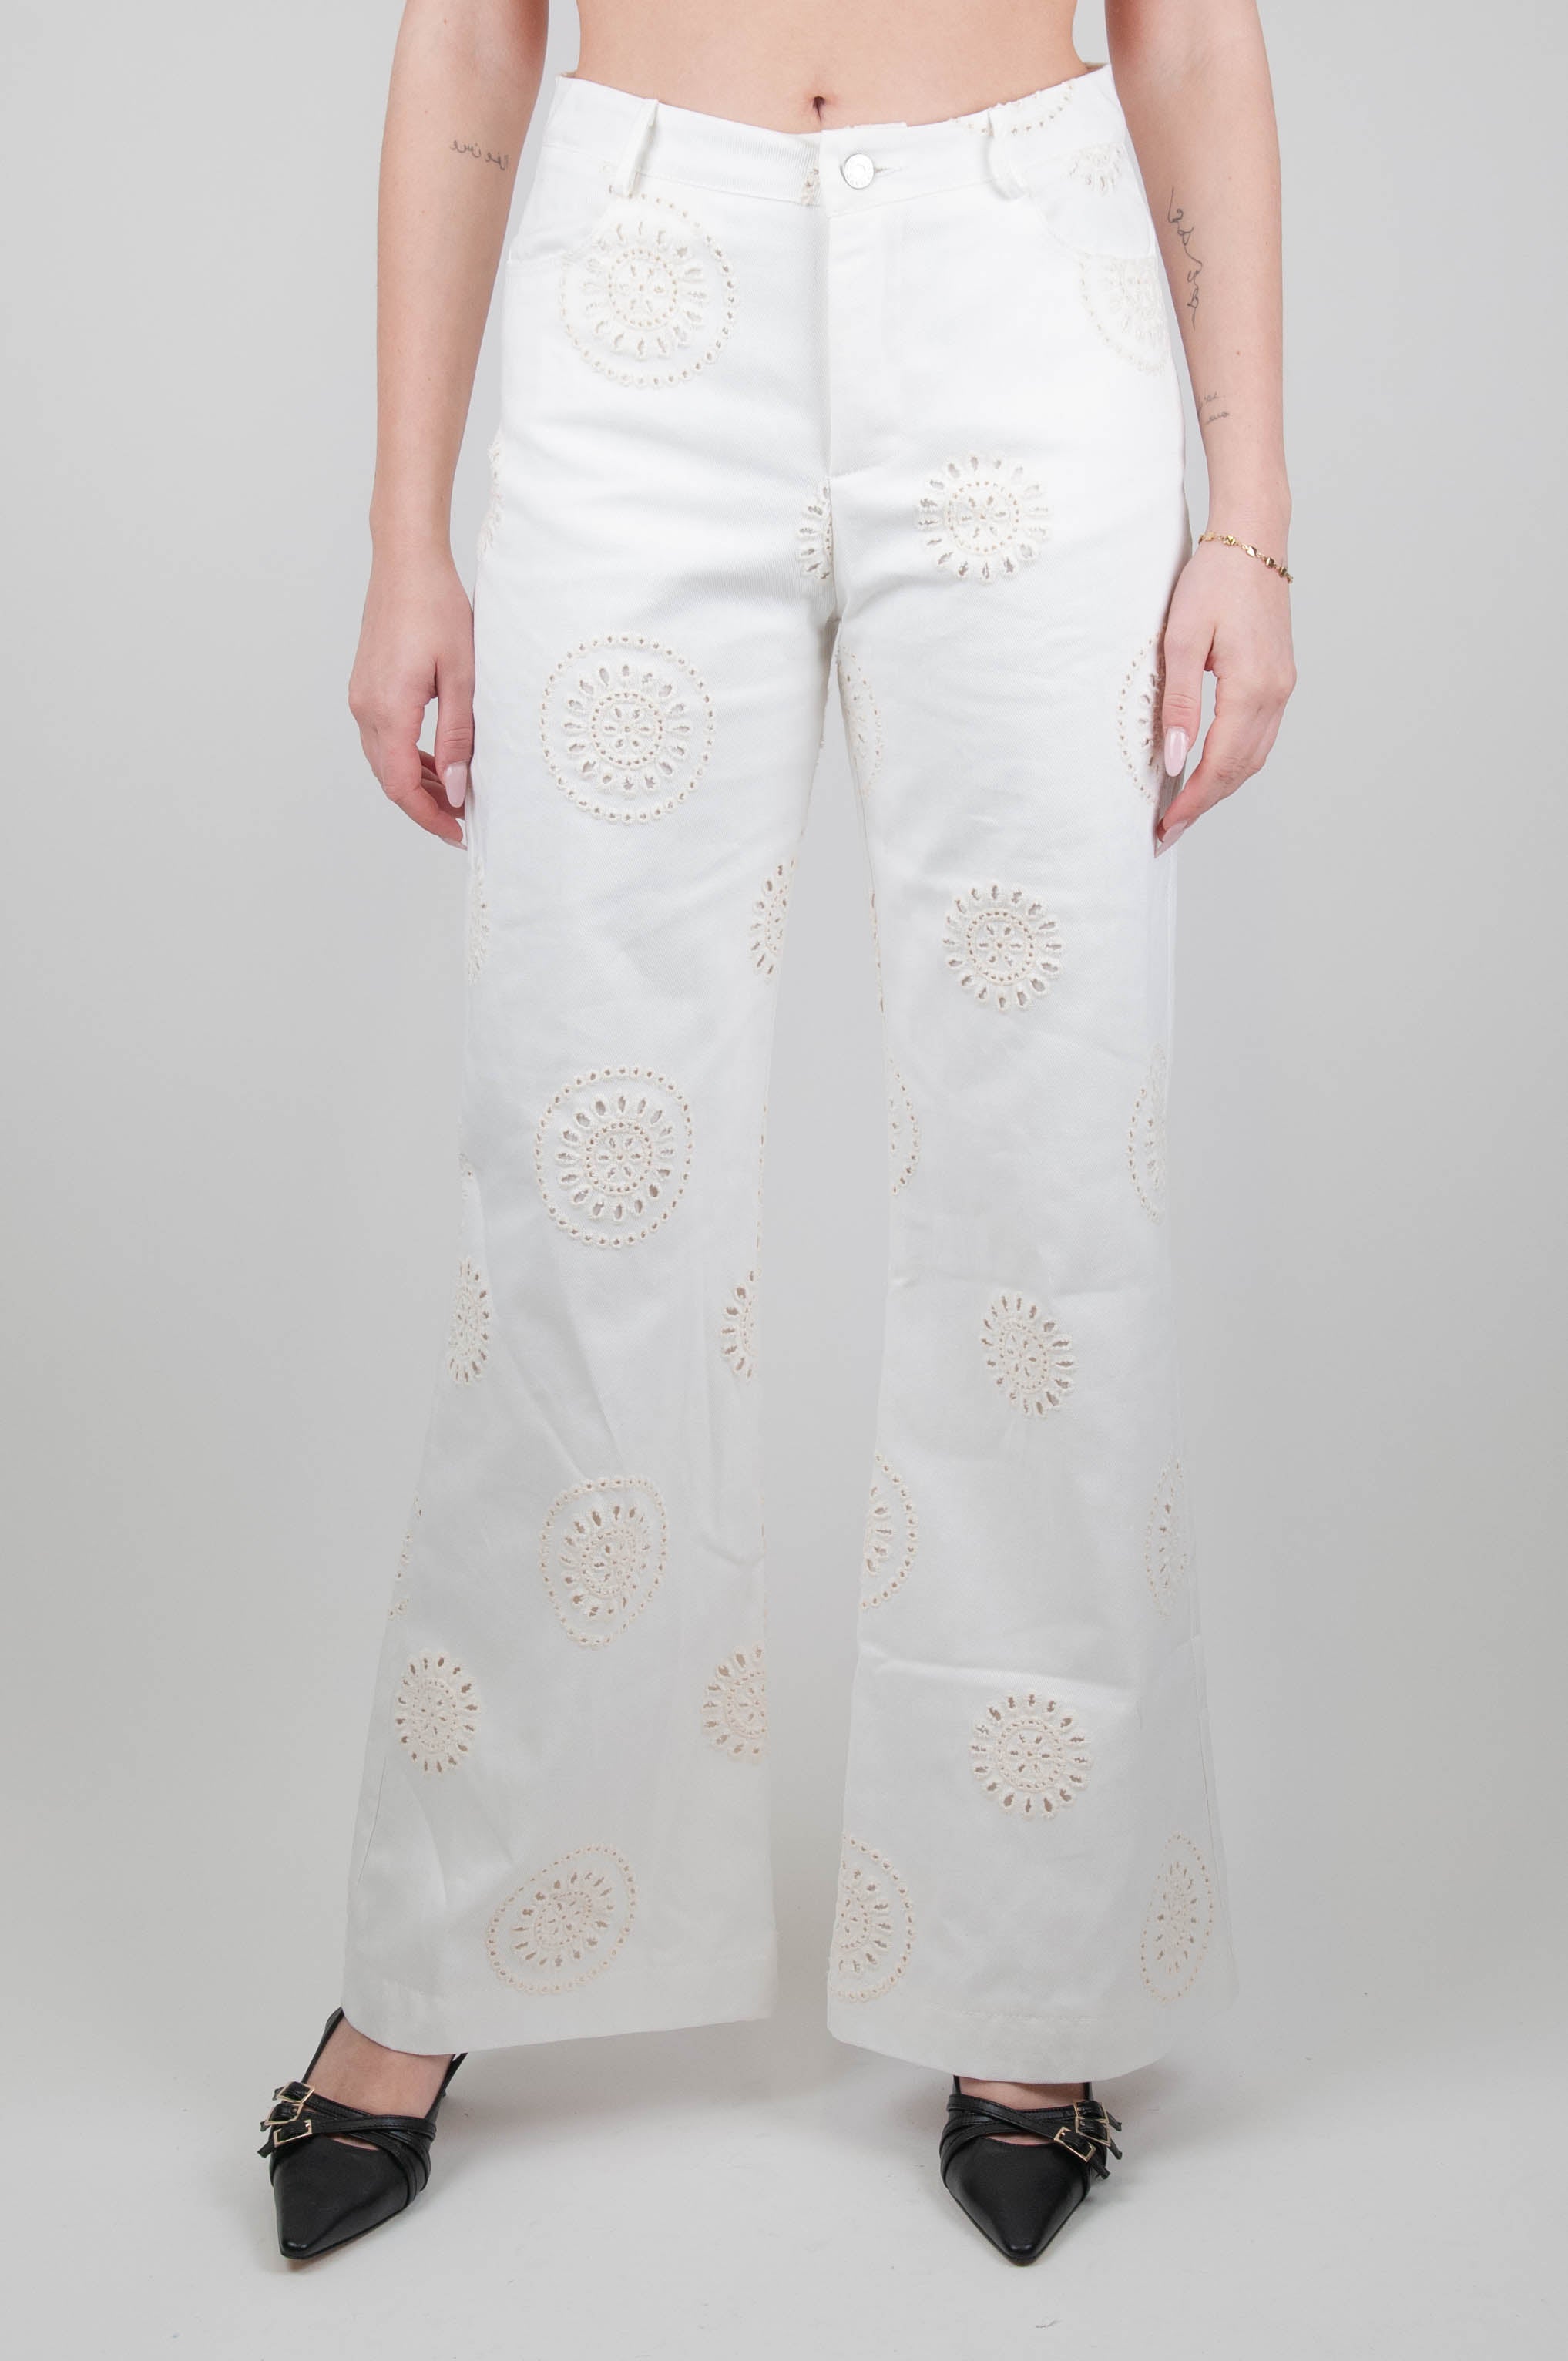 Haveone - Palazzo trousers with broderie anglaise embroidery